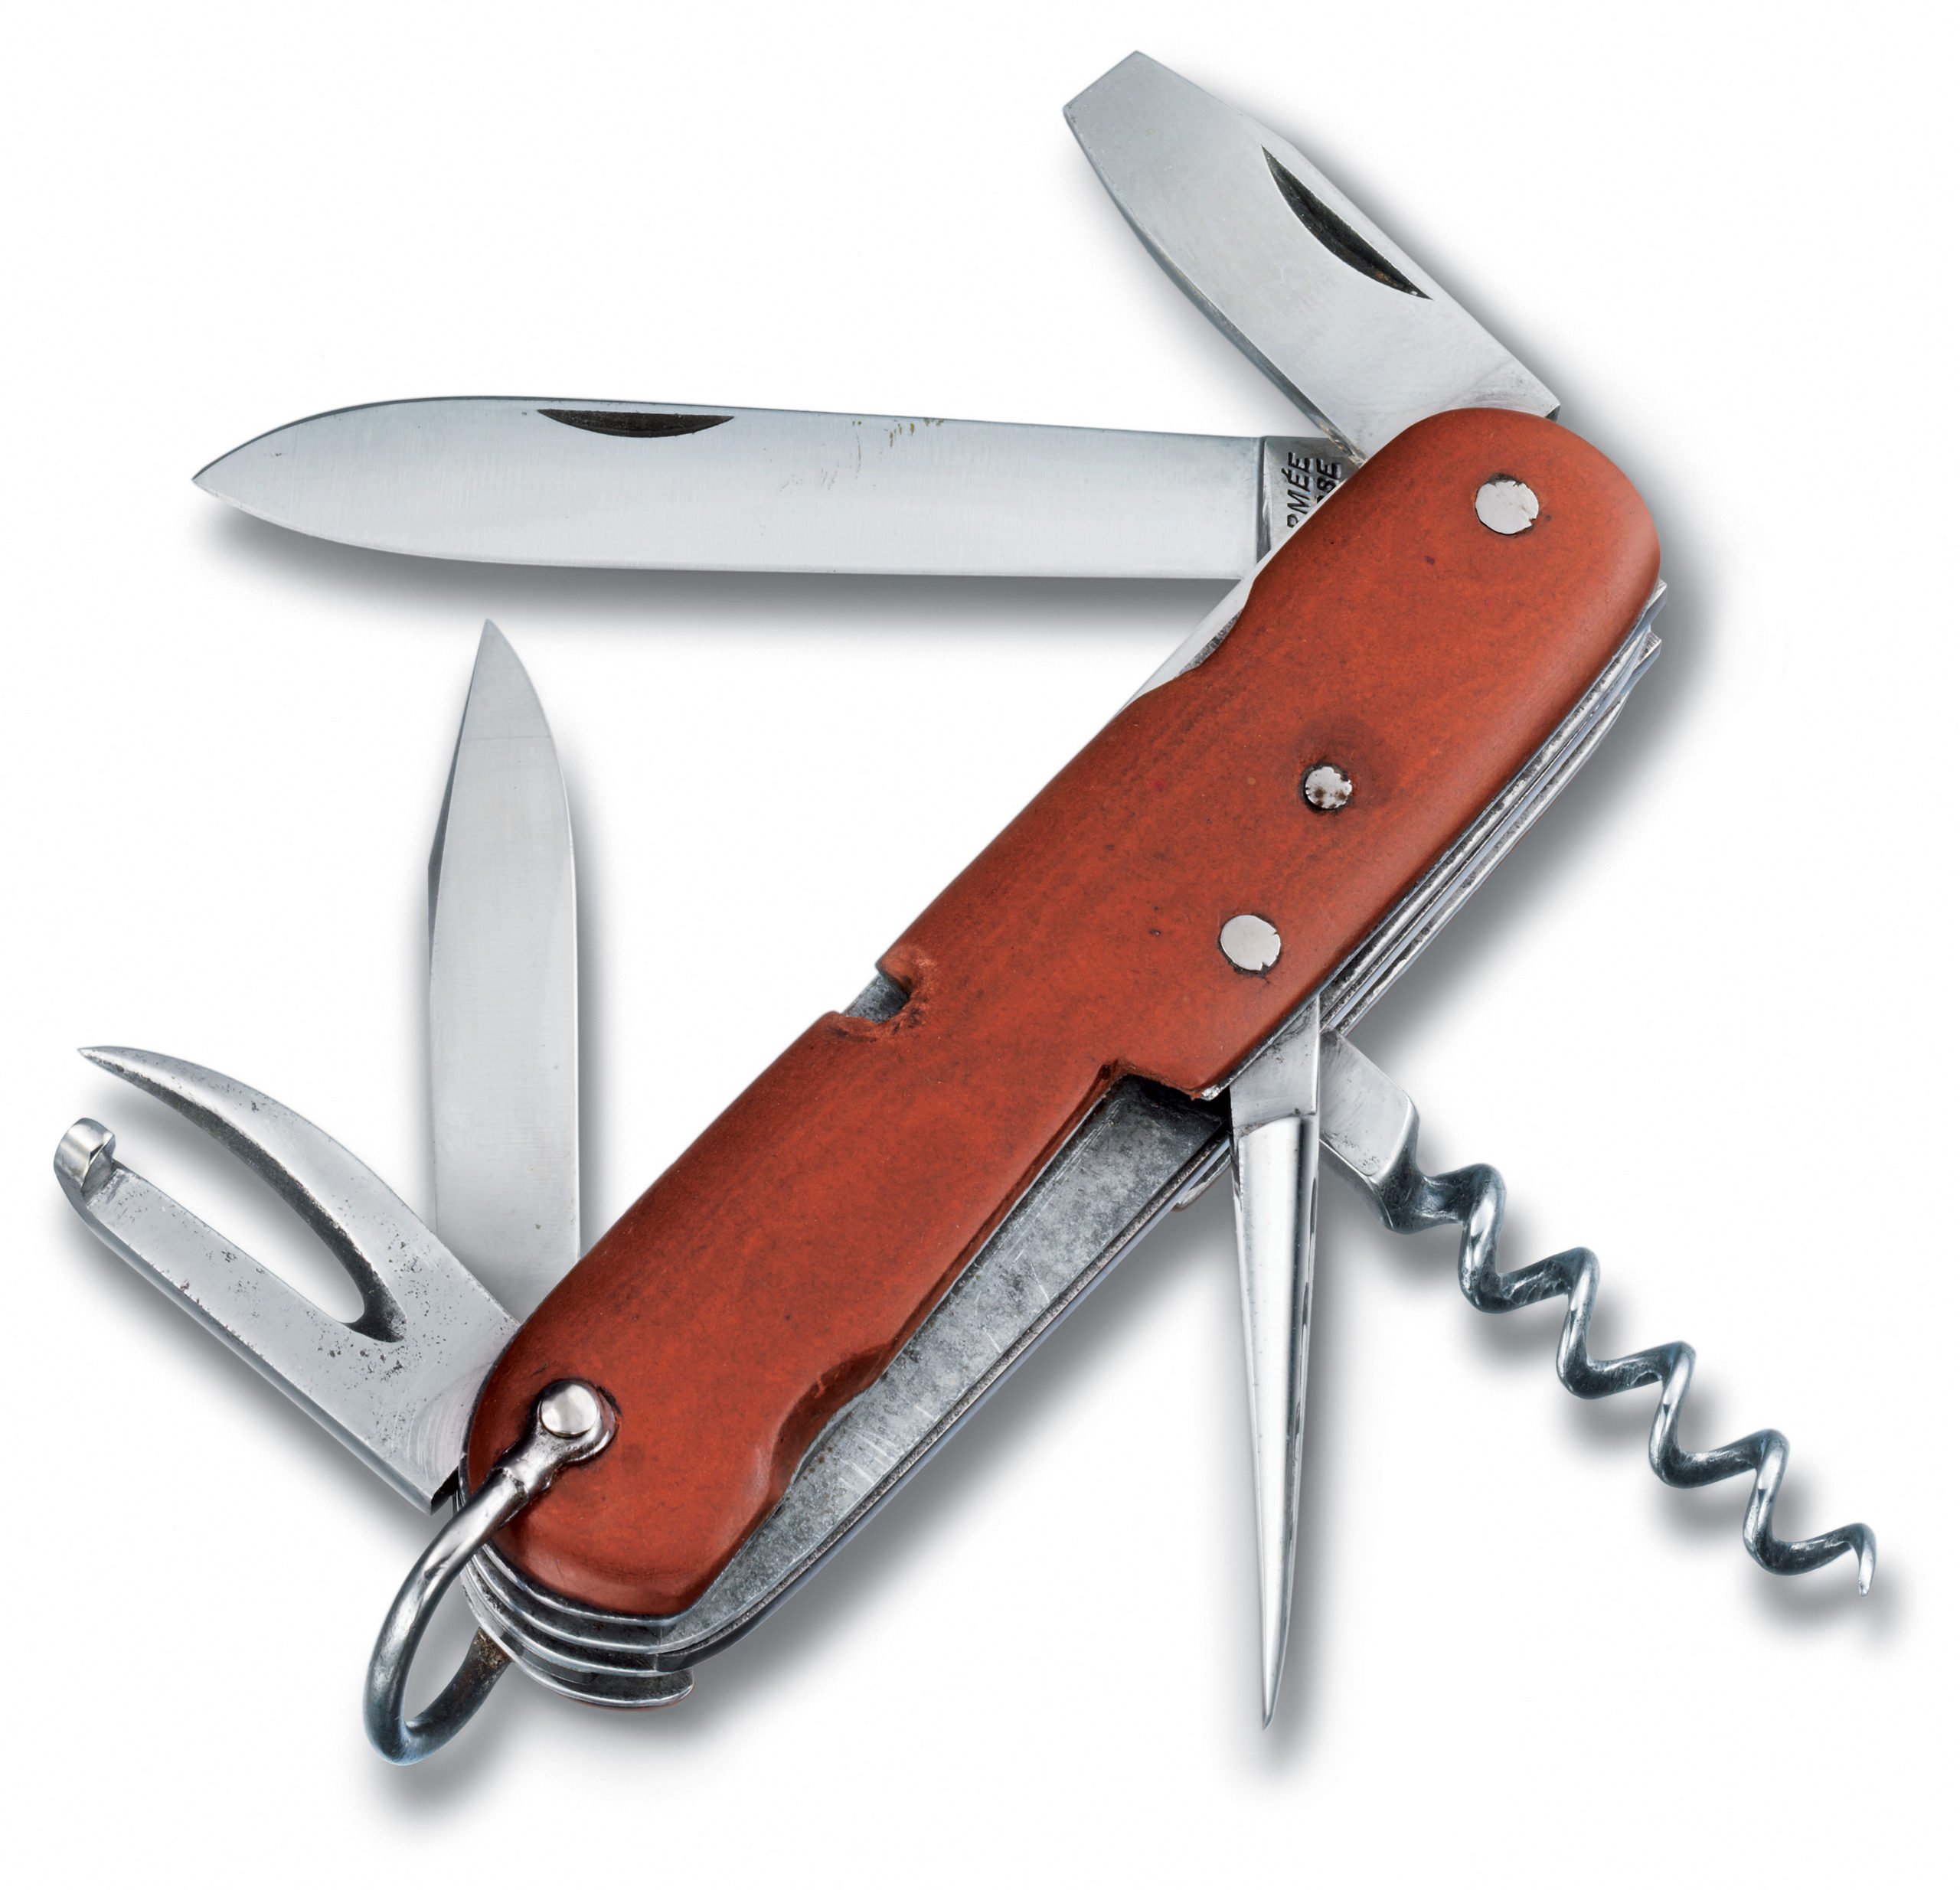 A Swiss Army Tools You Never Knew Existed 